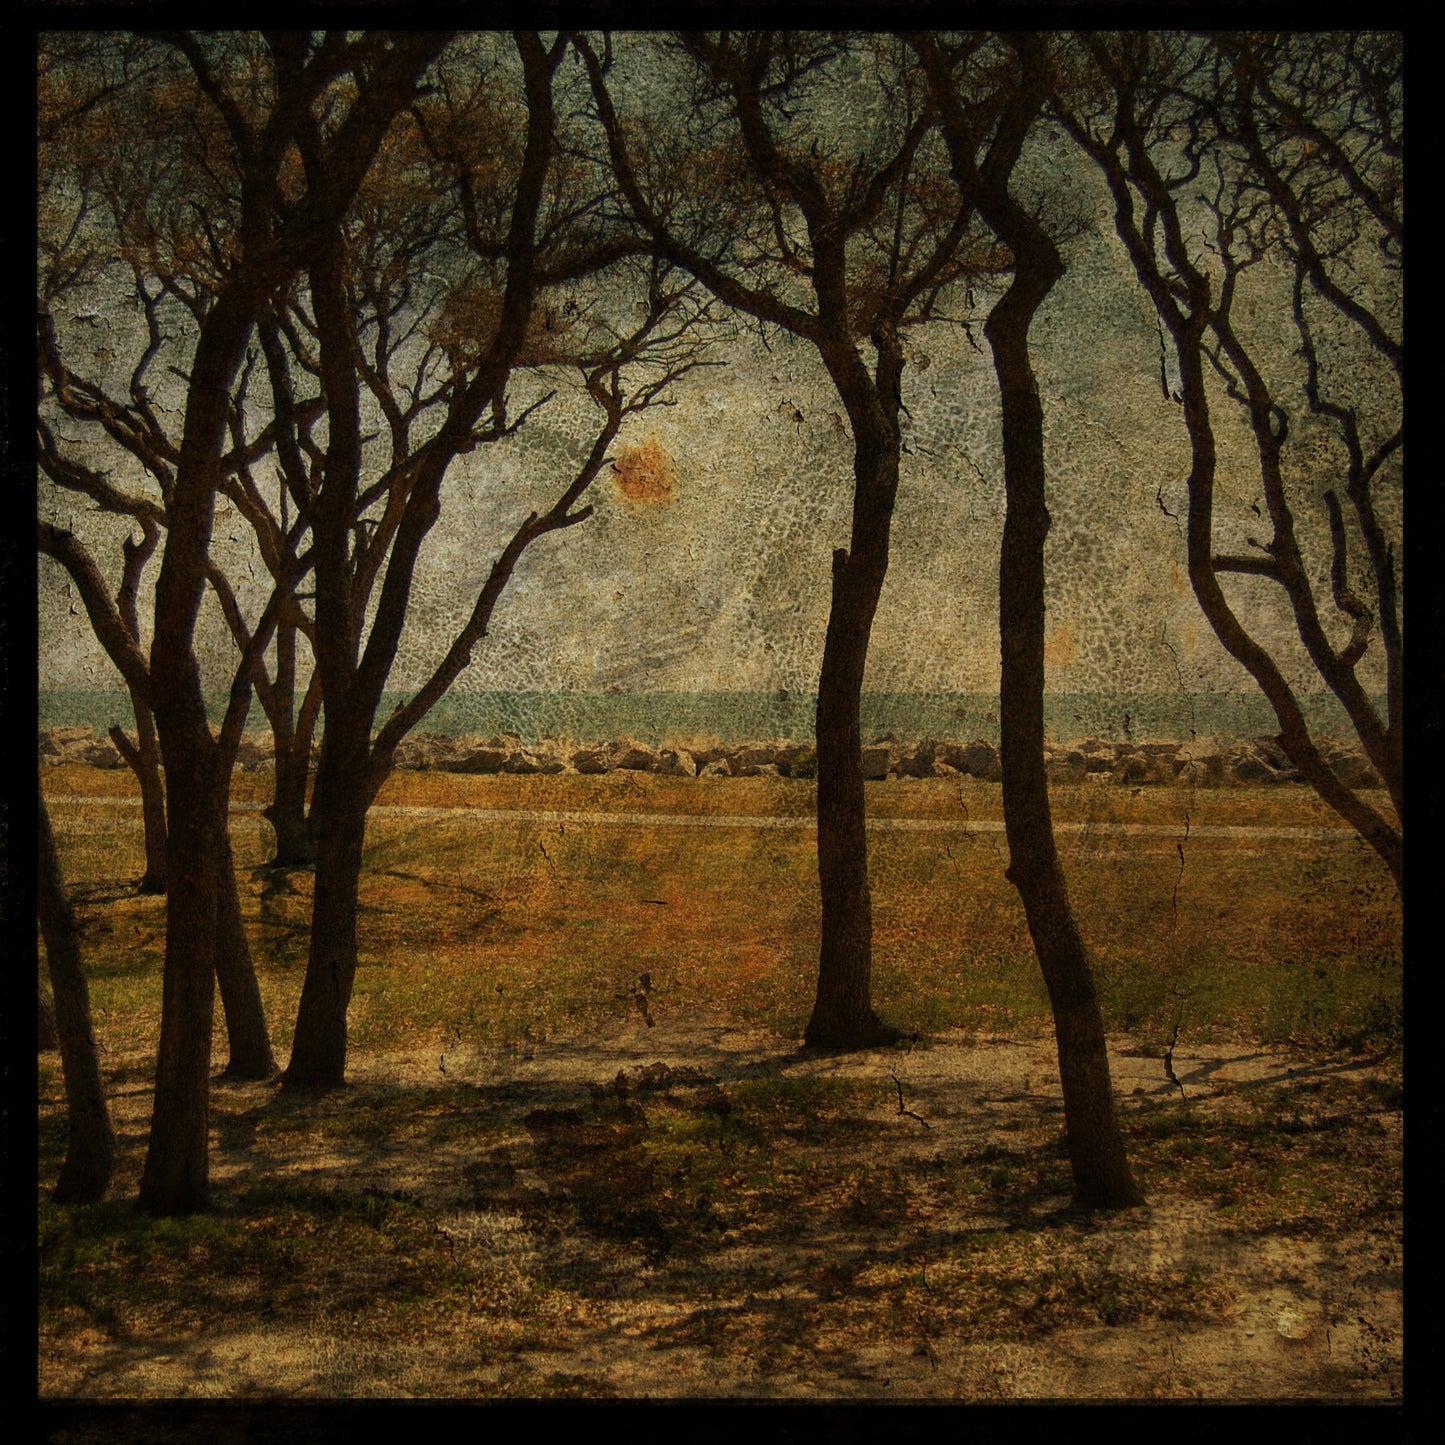 Fort Fisher Trees No. 2 Photograph